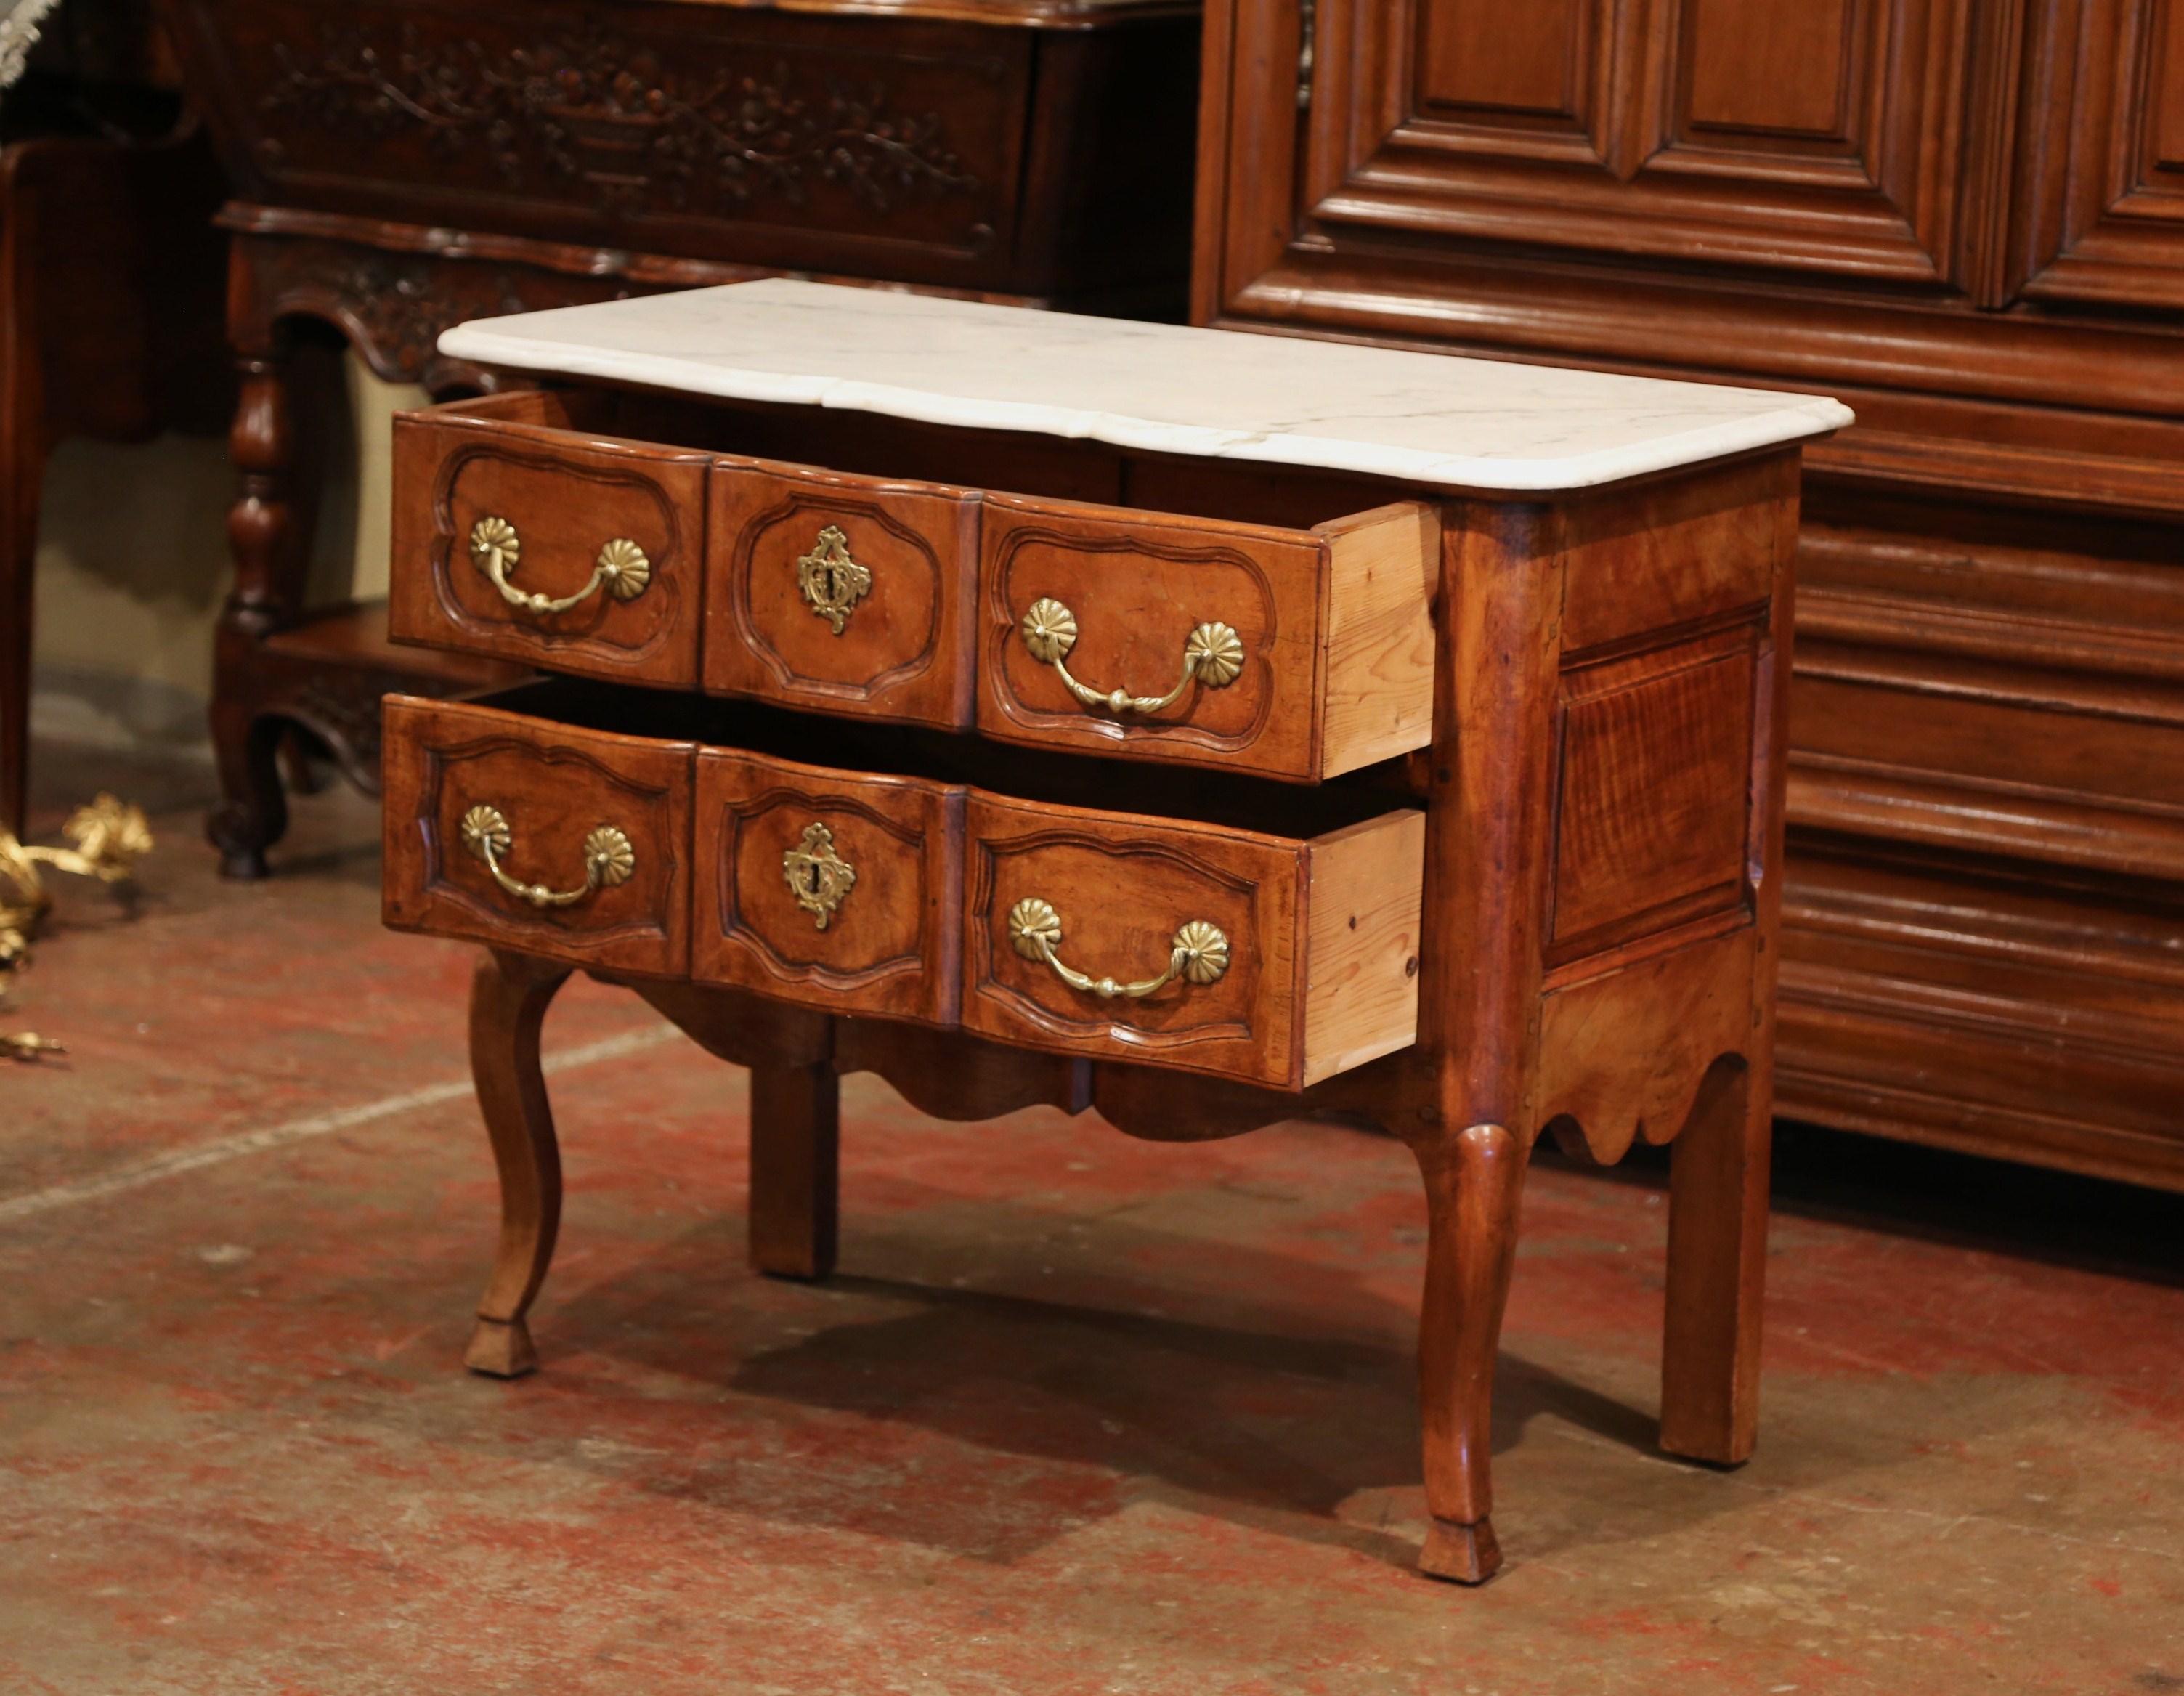 Hand-Carved Mid-19th Century French Carved Walnut Commode Chest of Drawers with Marble Top